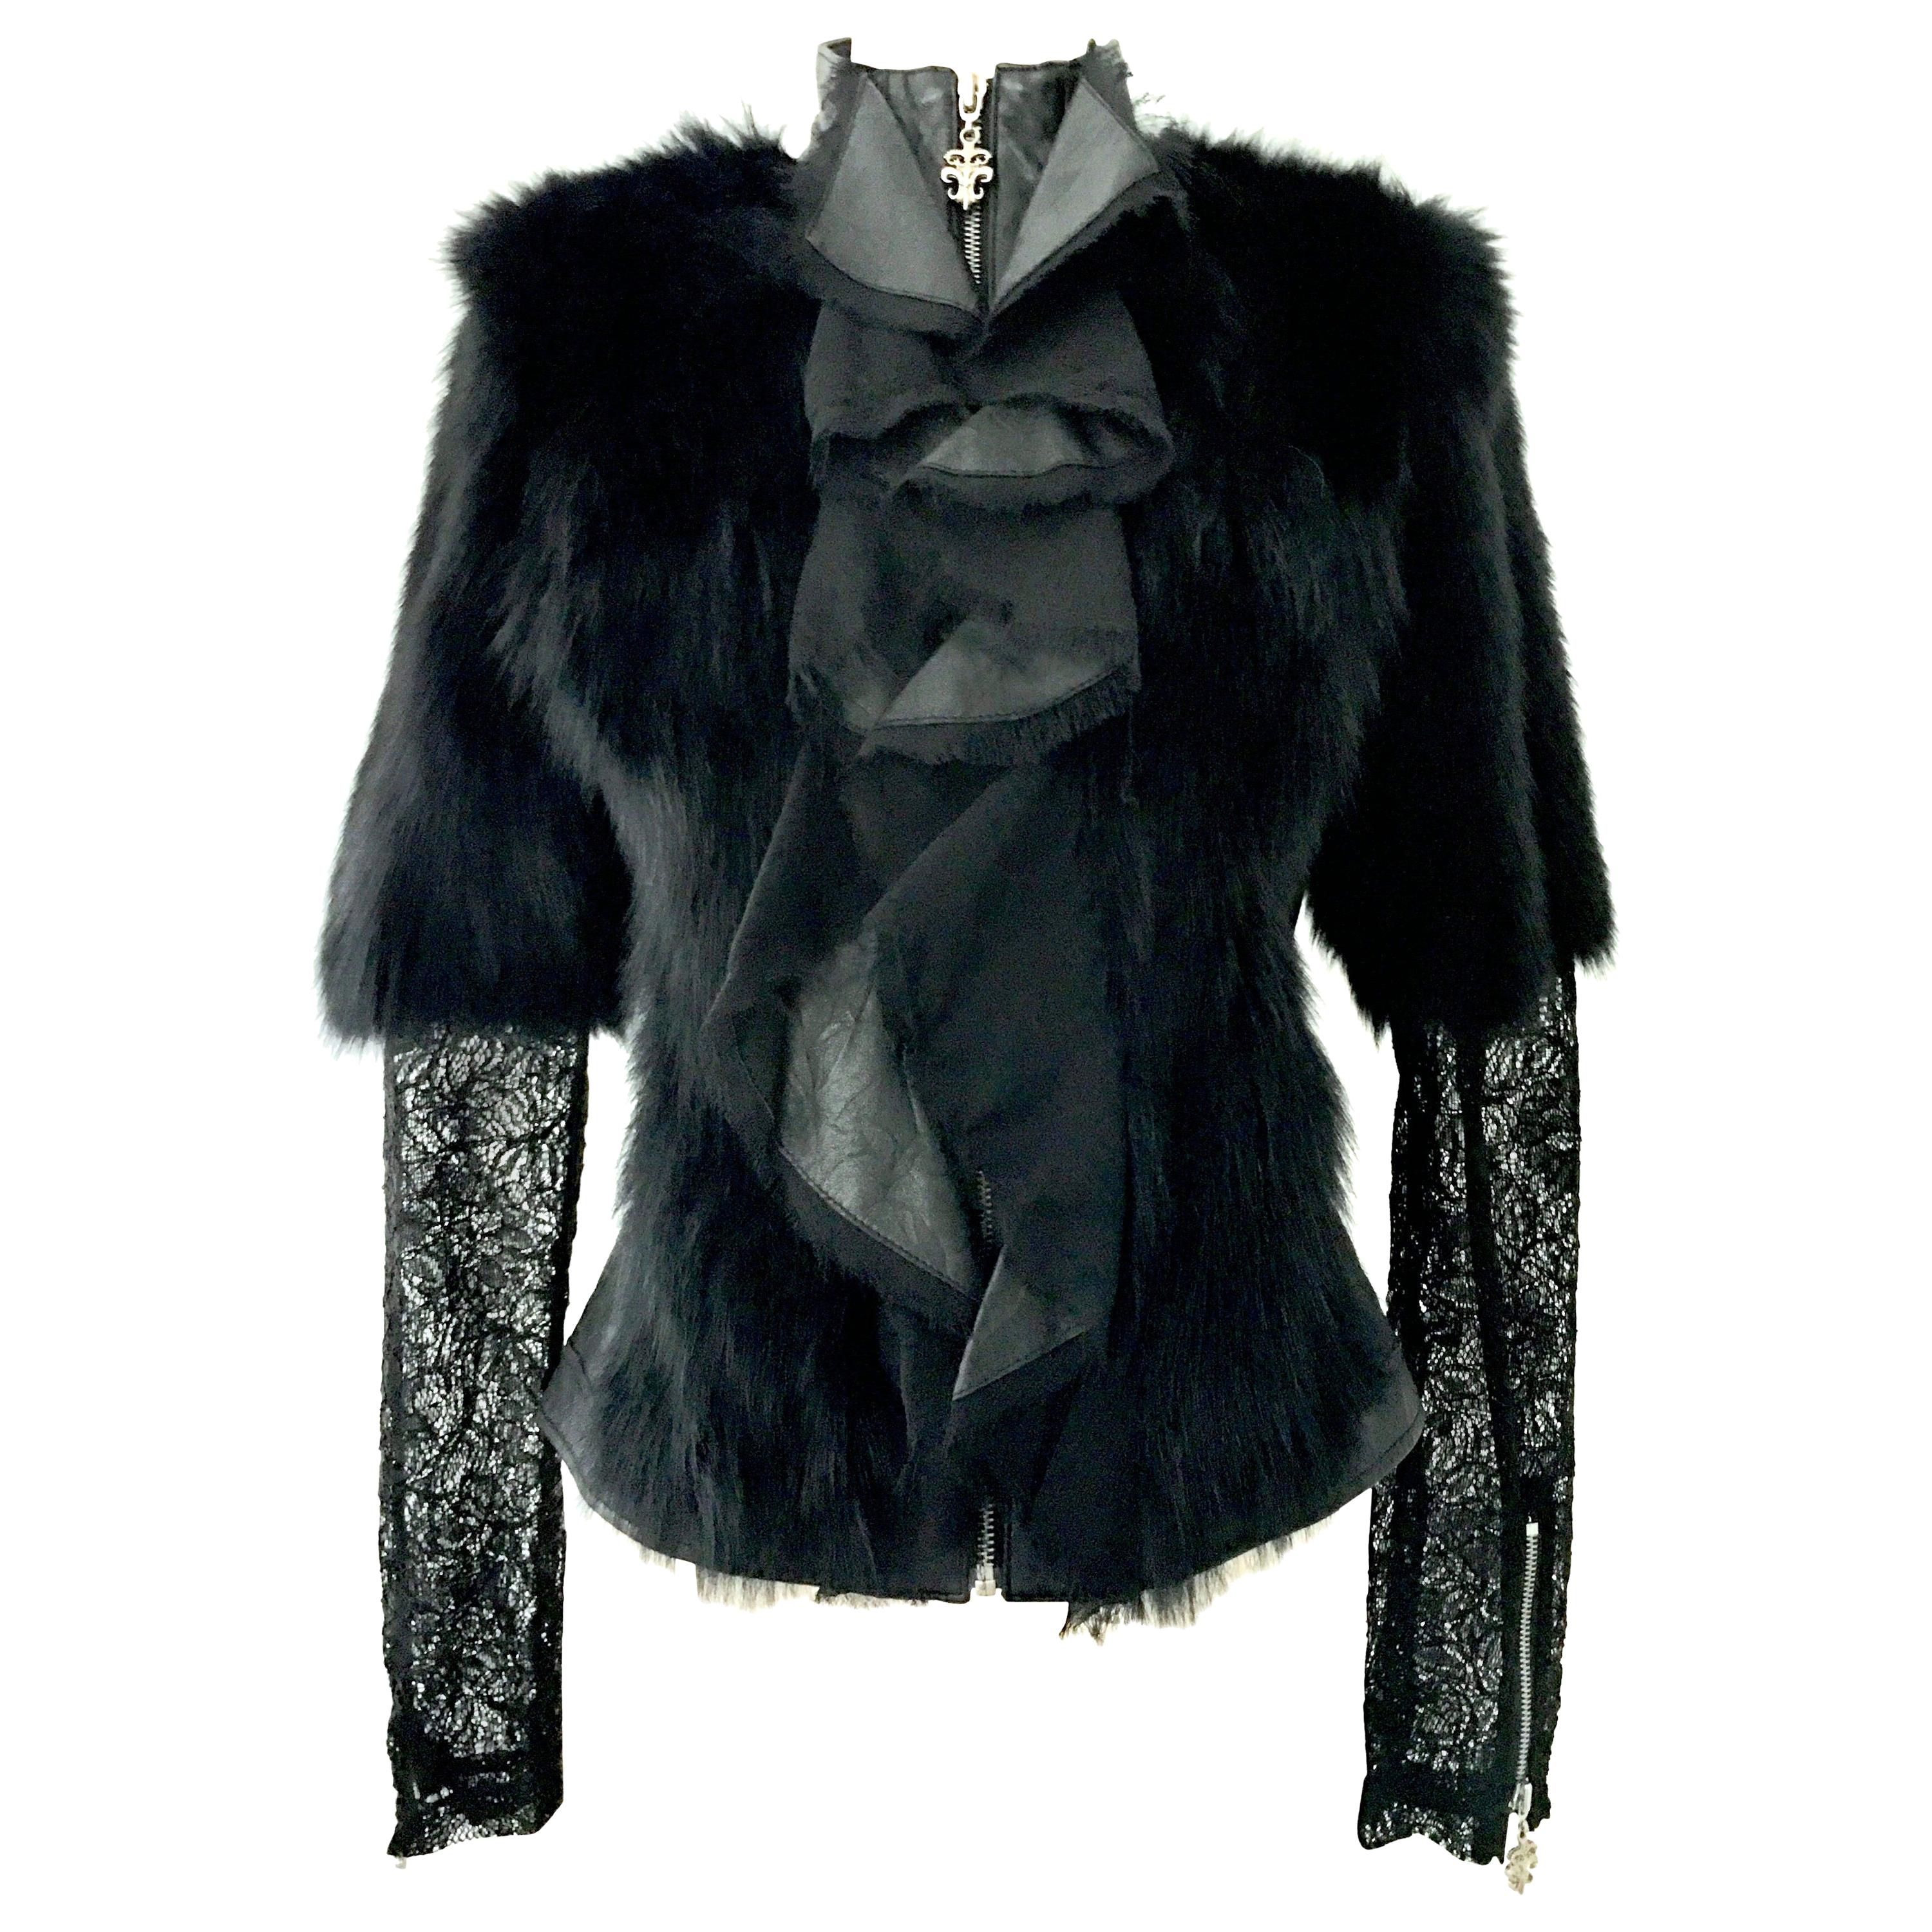 21st Century New Leather Fox Fur & Lace Shirt Or Jacket By, Royal Underground